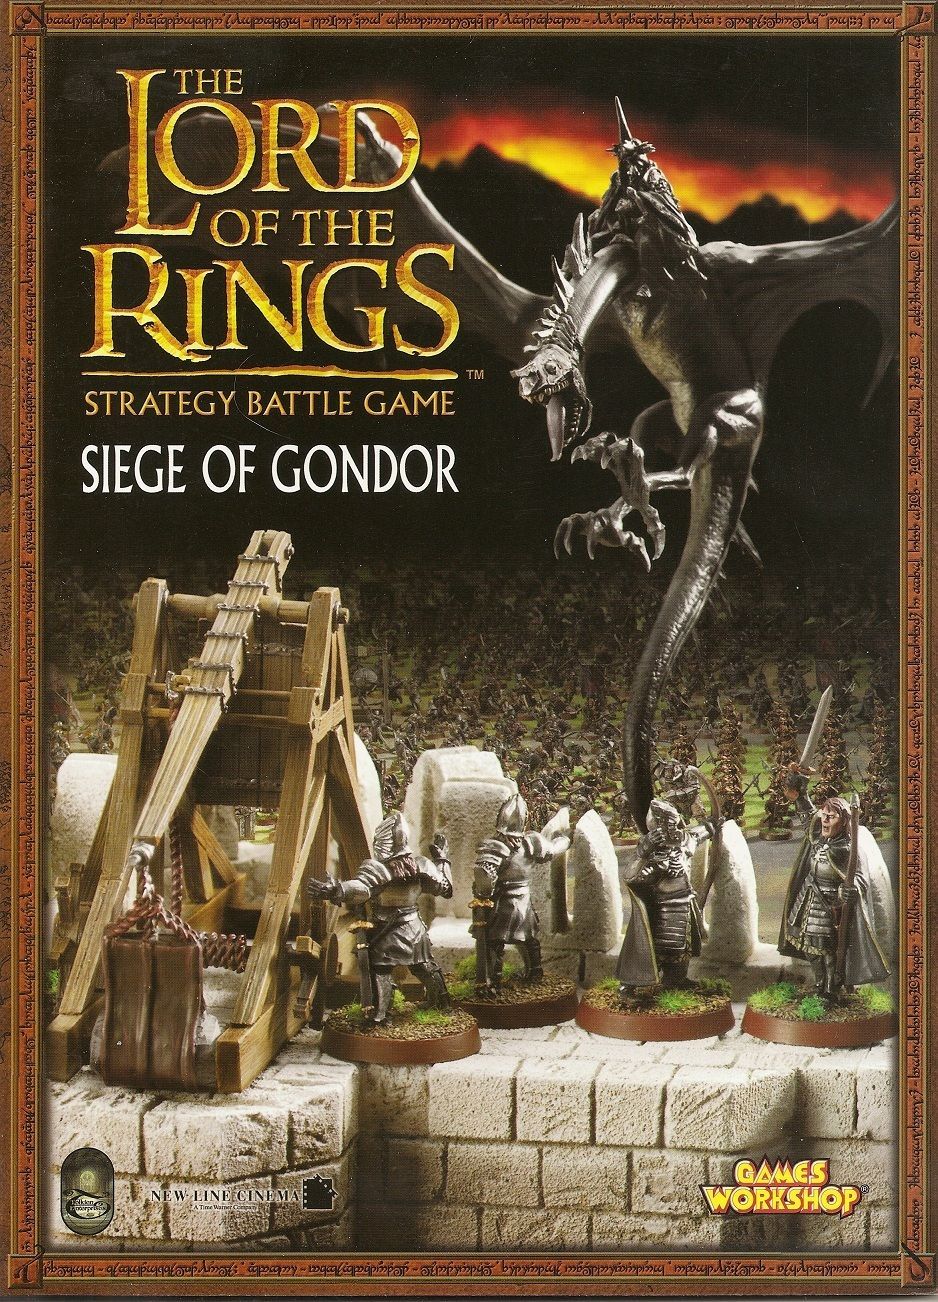 The Lord of the Rings Strategy Battle Game: The Siege of Gondor